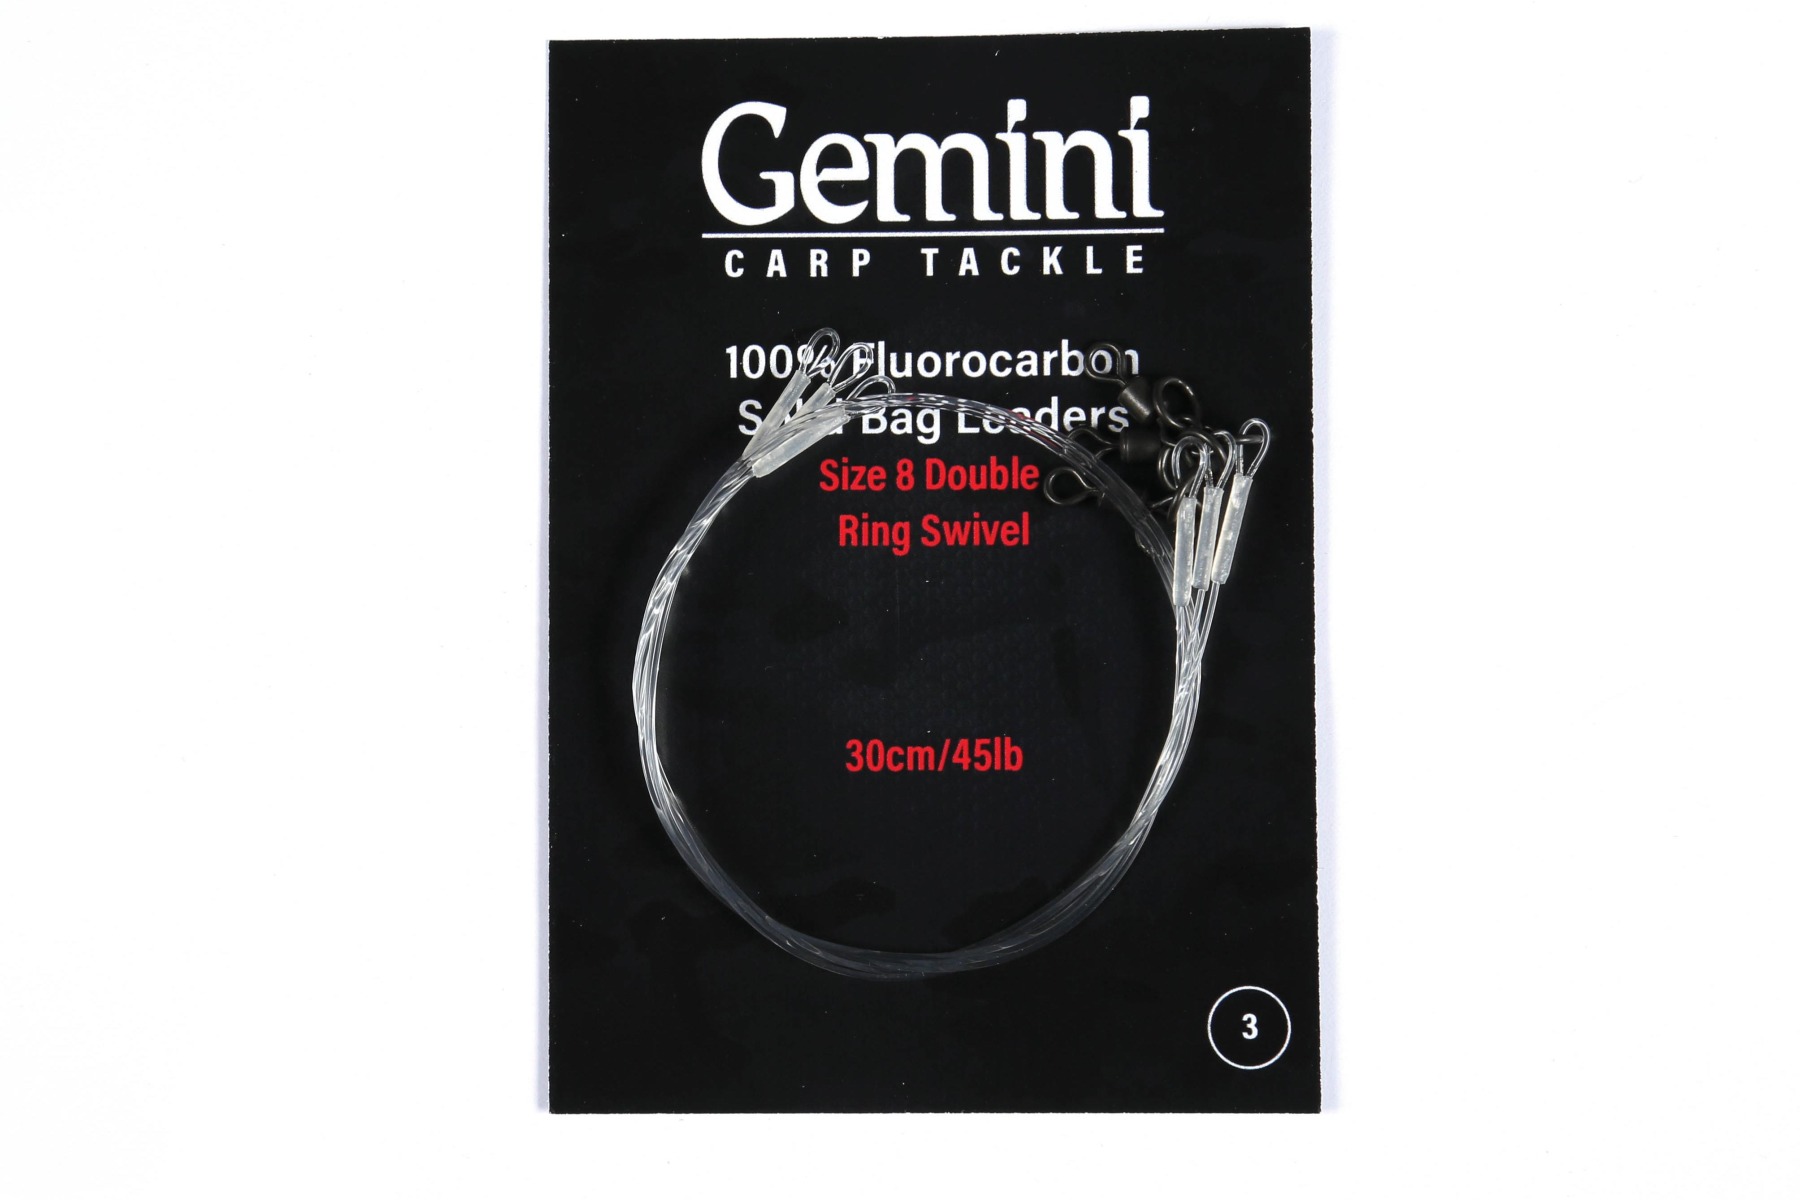 2. Another great addition to the Gemini range 